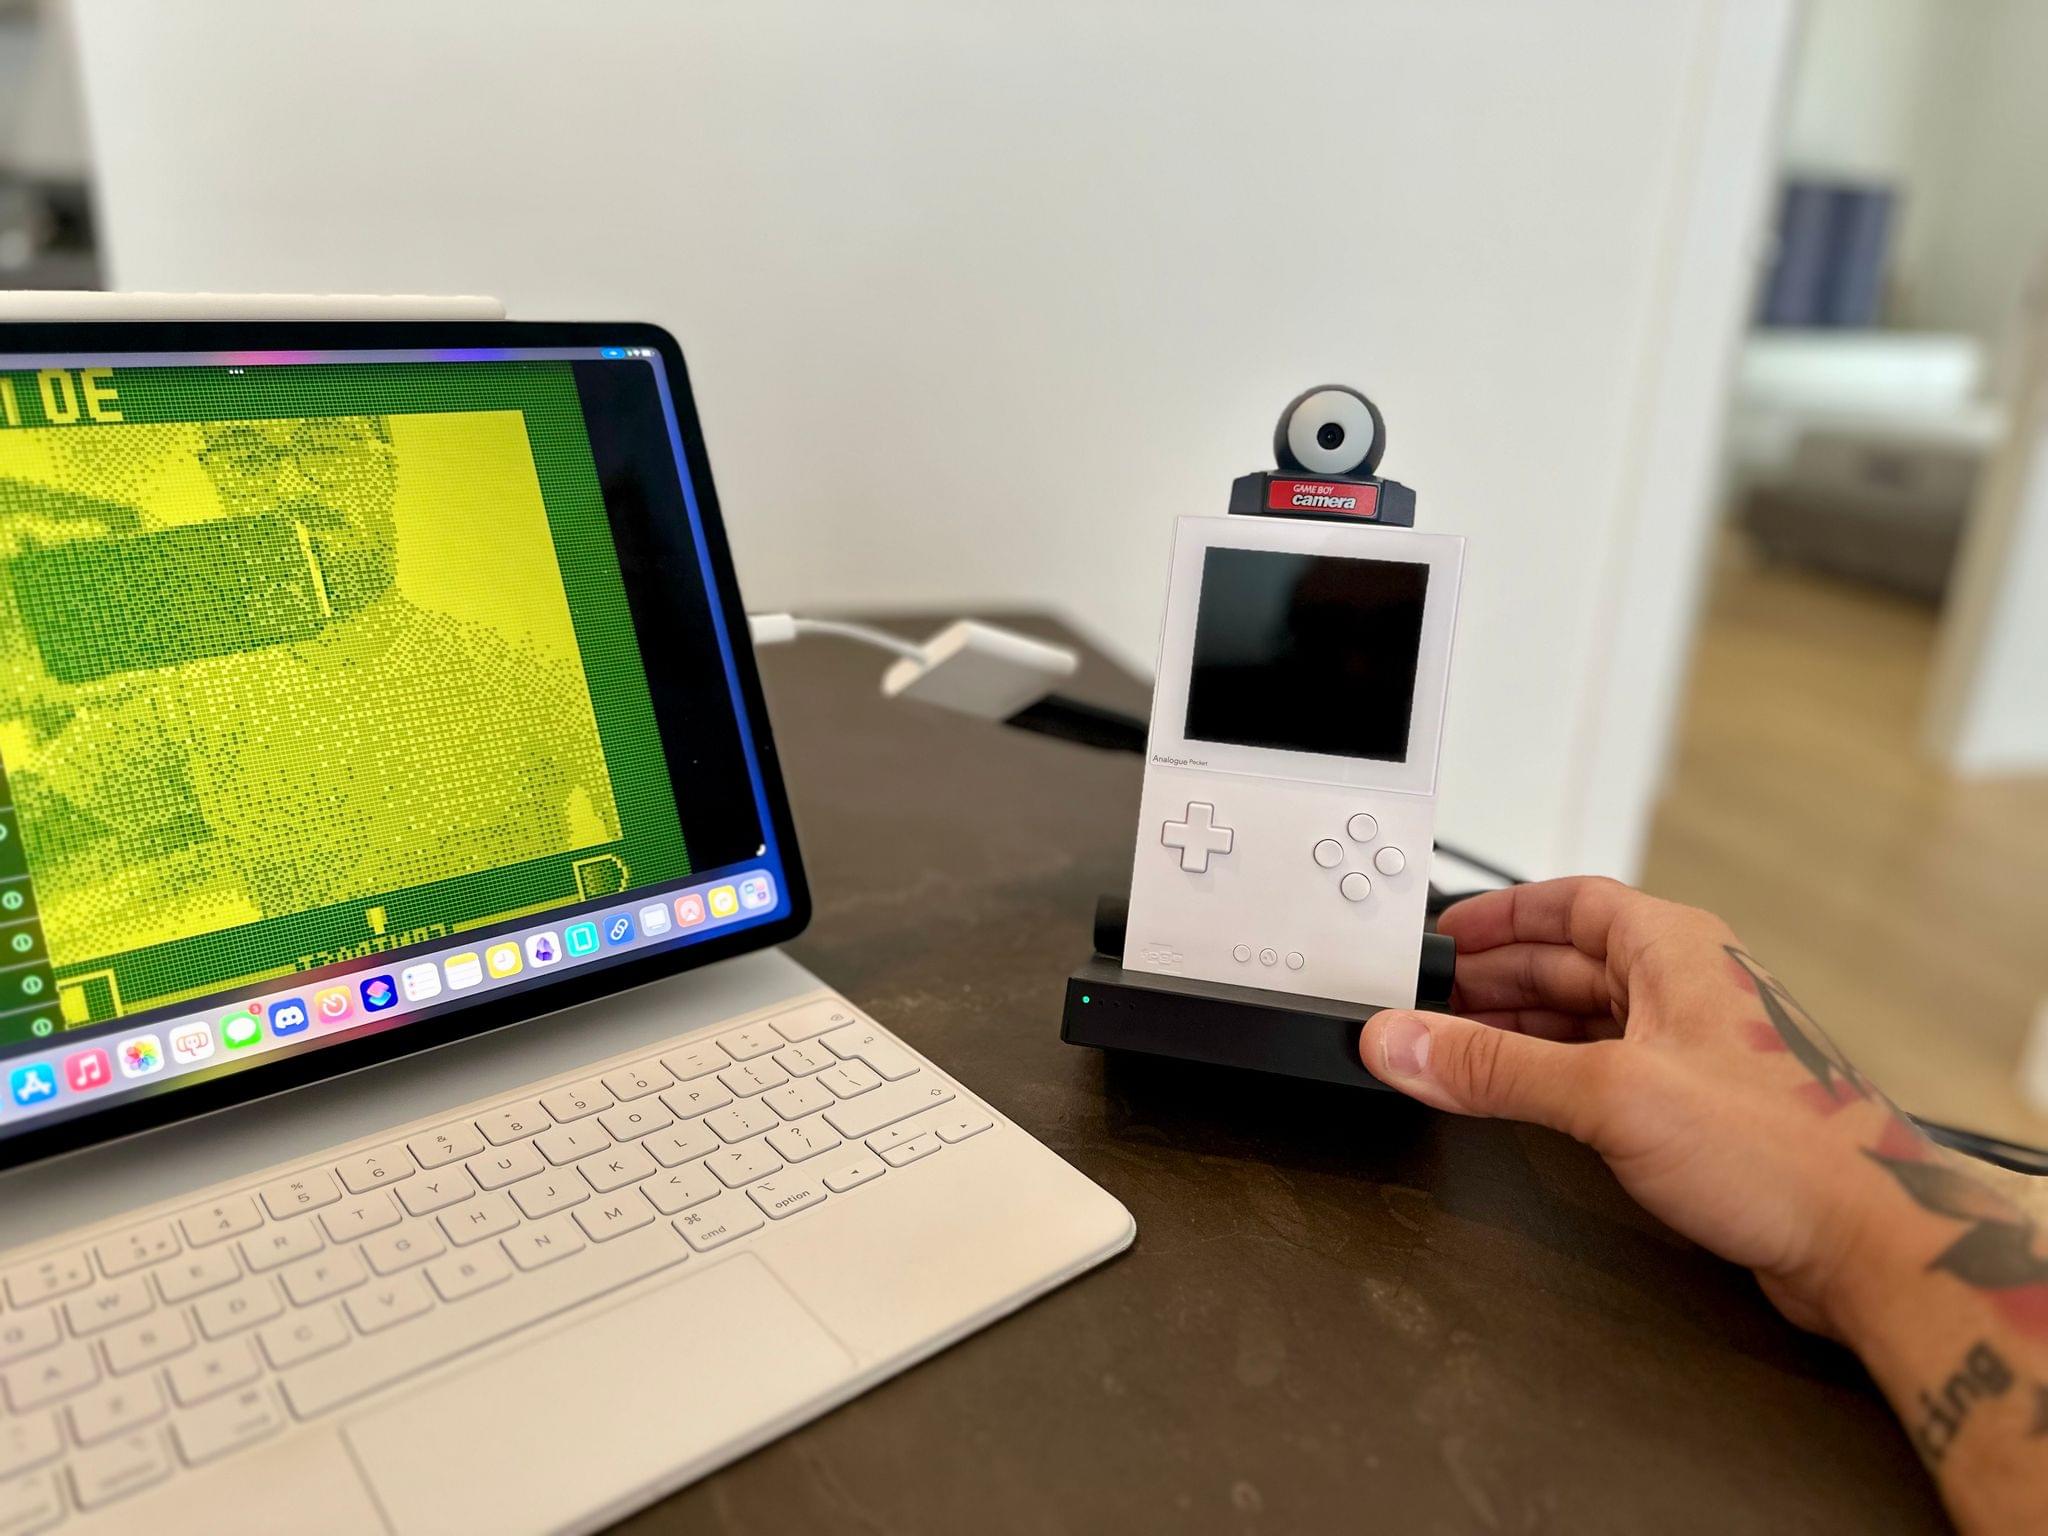 An iPad Pro mounted on a Magic keyboard and a Game Boy Camera in an Analogue Pocket are seen side by side on a desk.